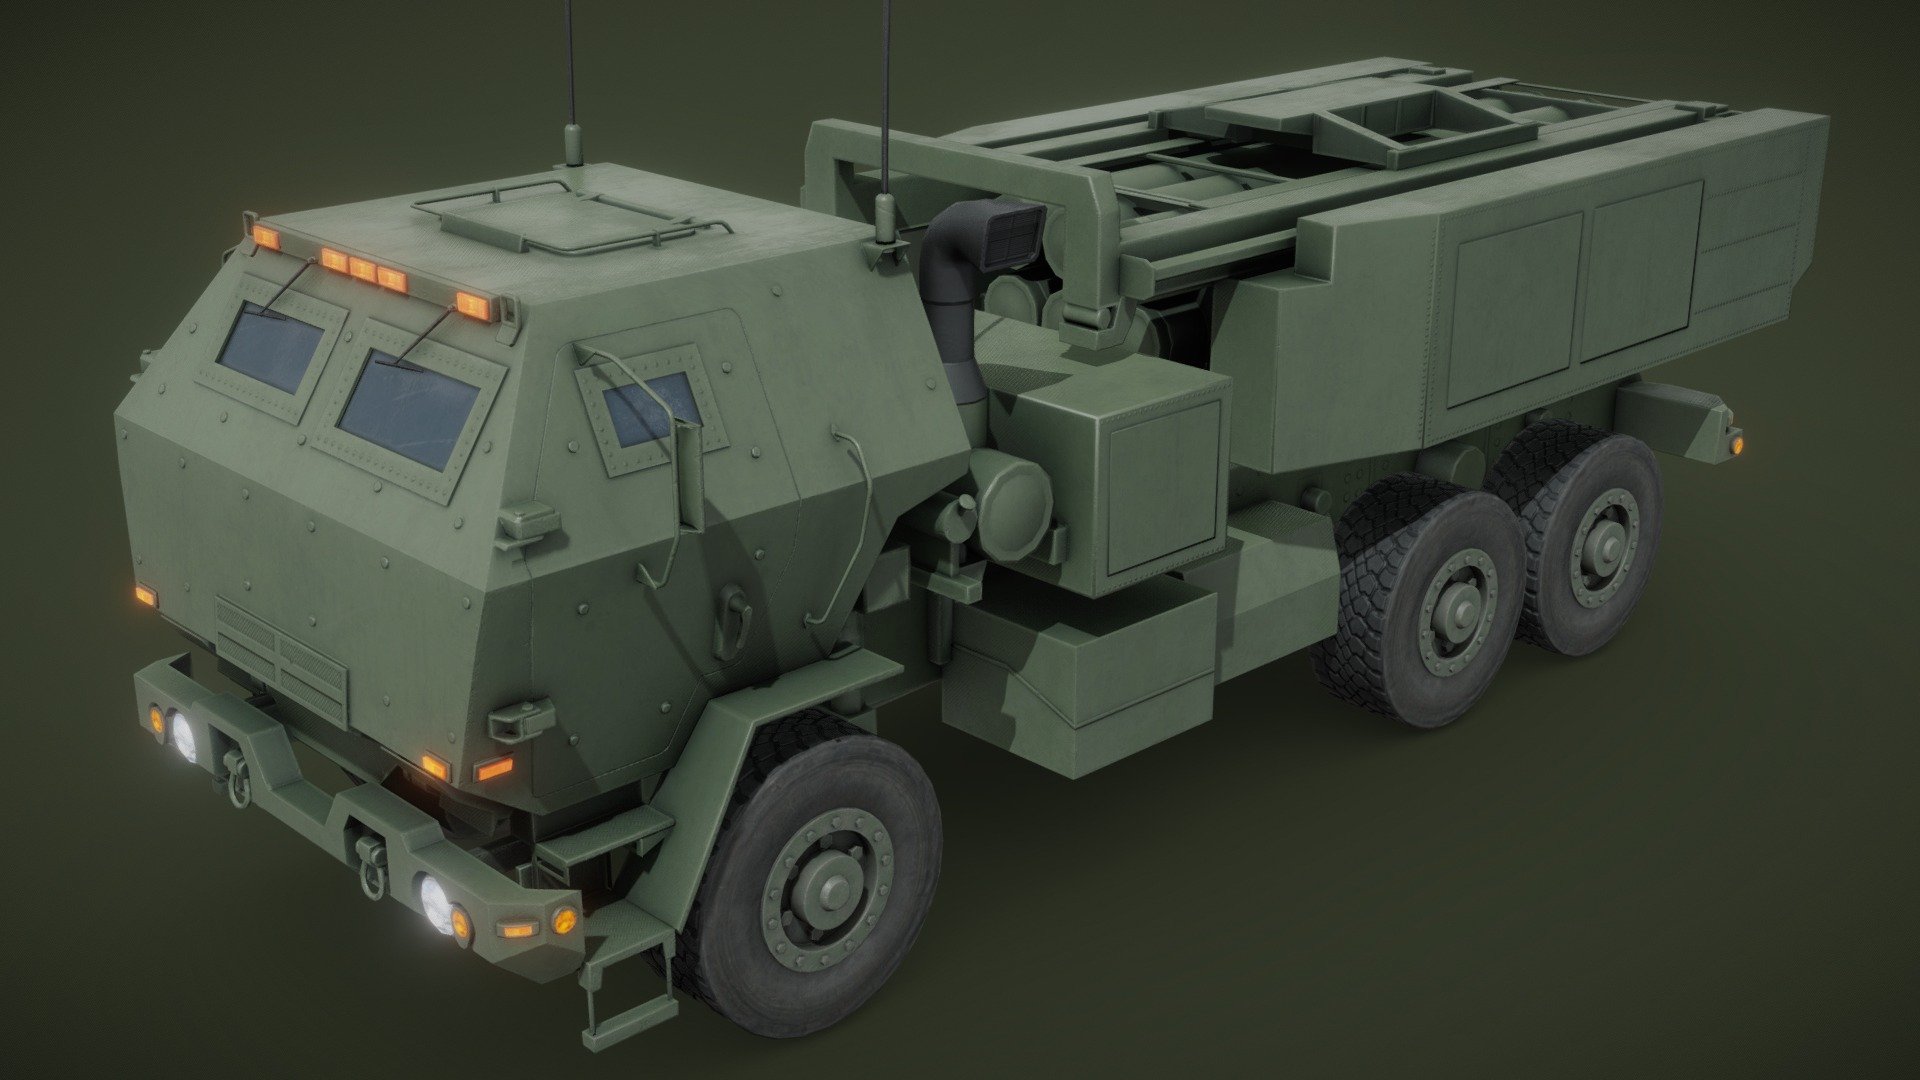 The M142 High Mobility Artillery Rocket System (HIMARS) is a light multiple rocket launcher developed in the late 1990s for the United States Army and mounted on a standard U.S. Army M1140 truck frame.

Includes desert paint version - M142 HIMARS - Buy Royalty Free 3D model by Mateusz Woliński (@jeandiz) 3d model